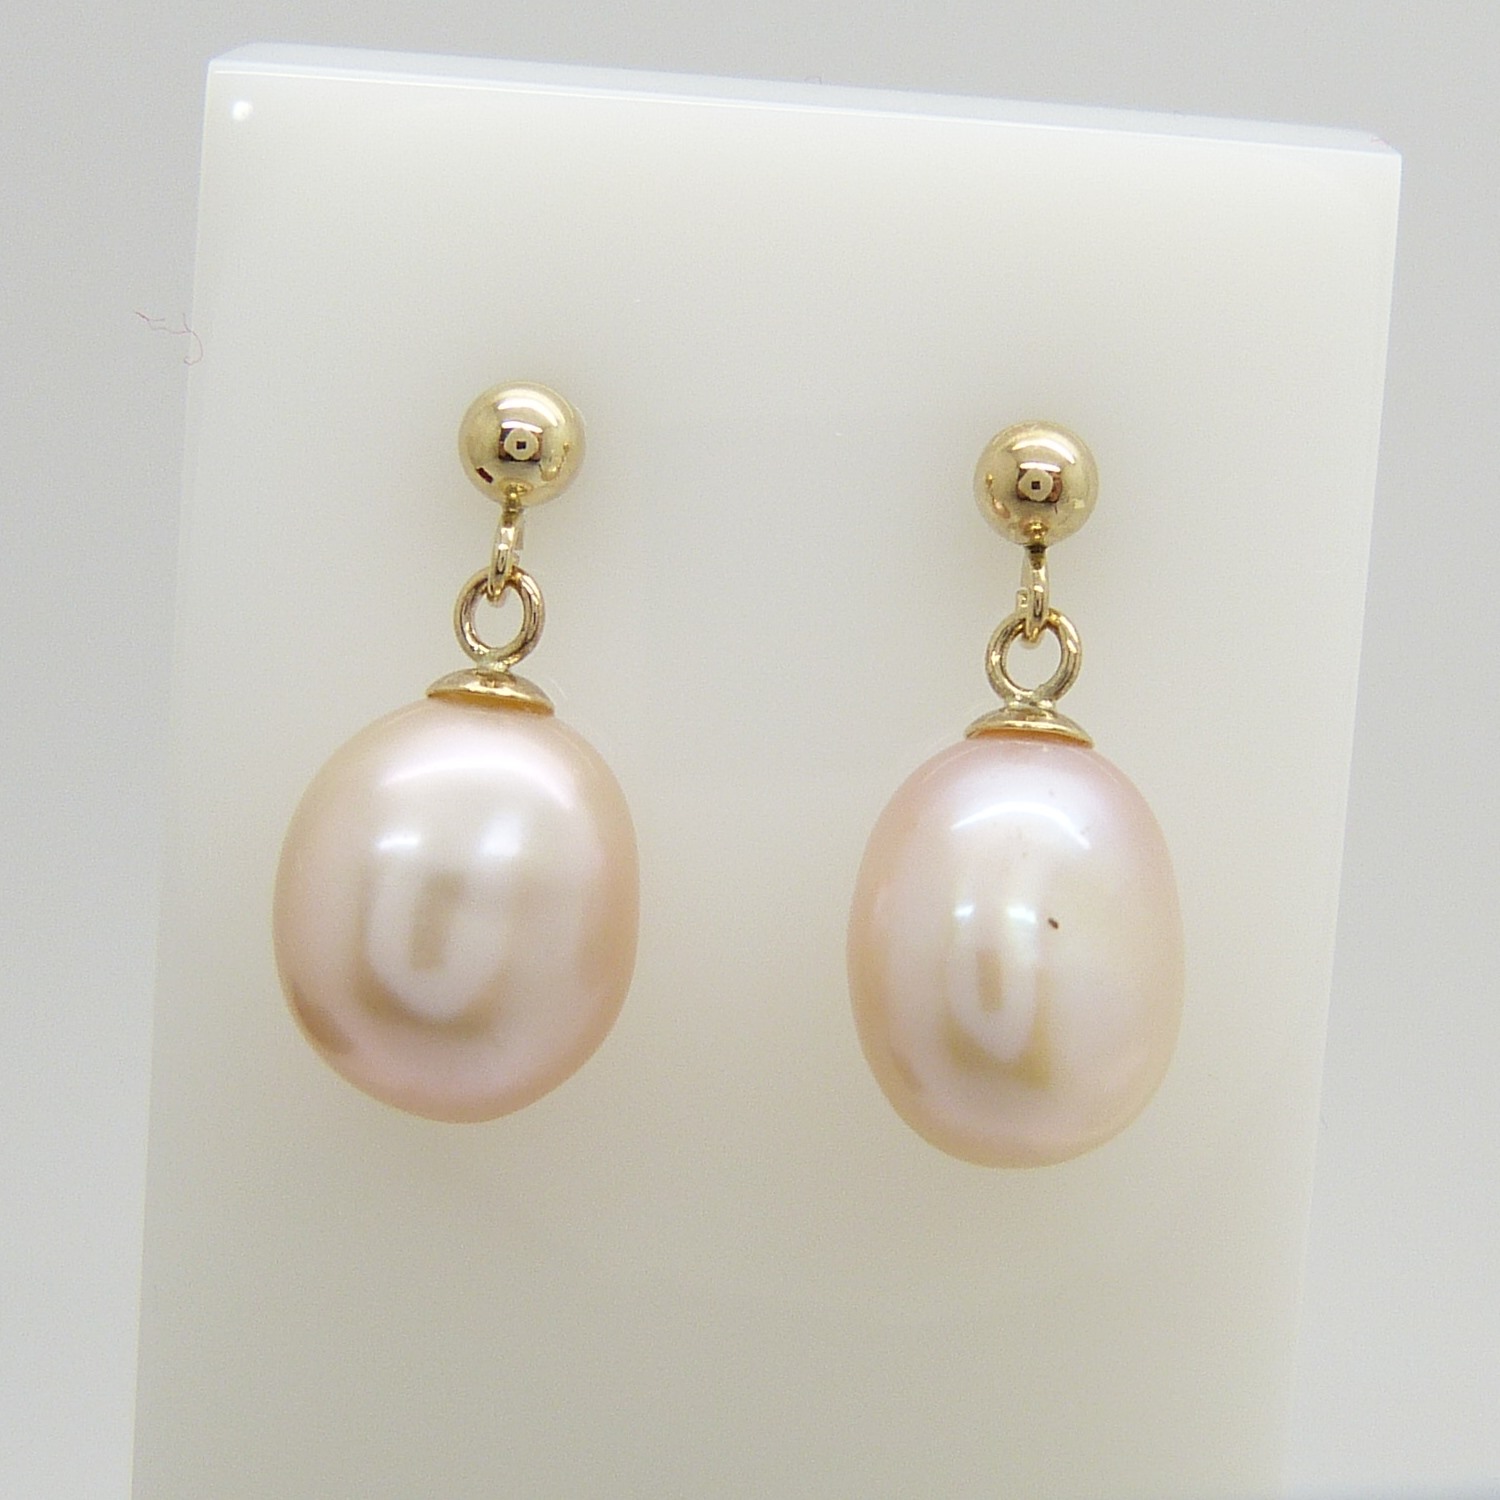 A pair of white freshwater pearl drop ear studs in 9ct yellow gold, boxed